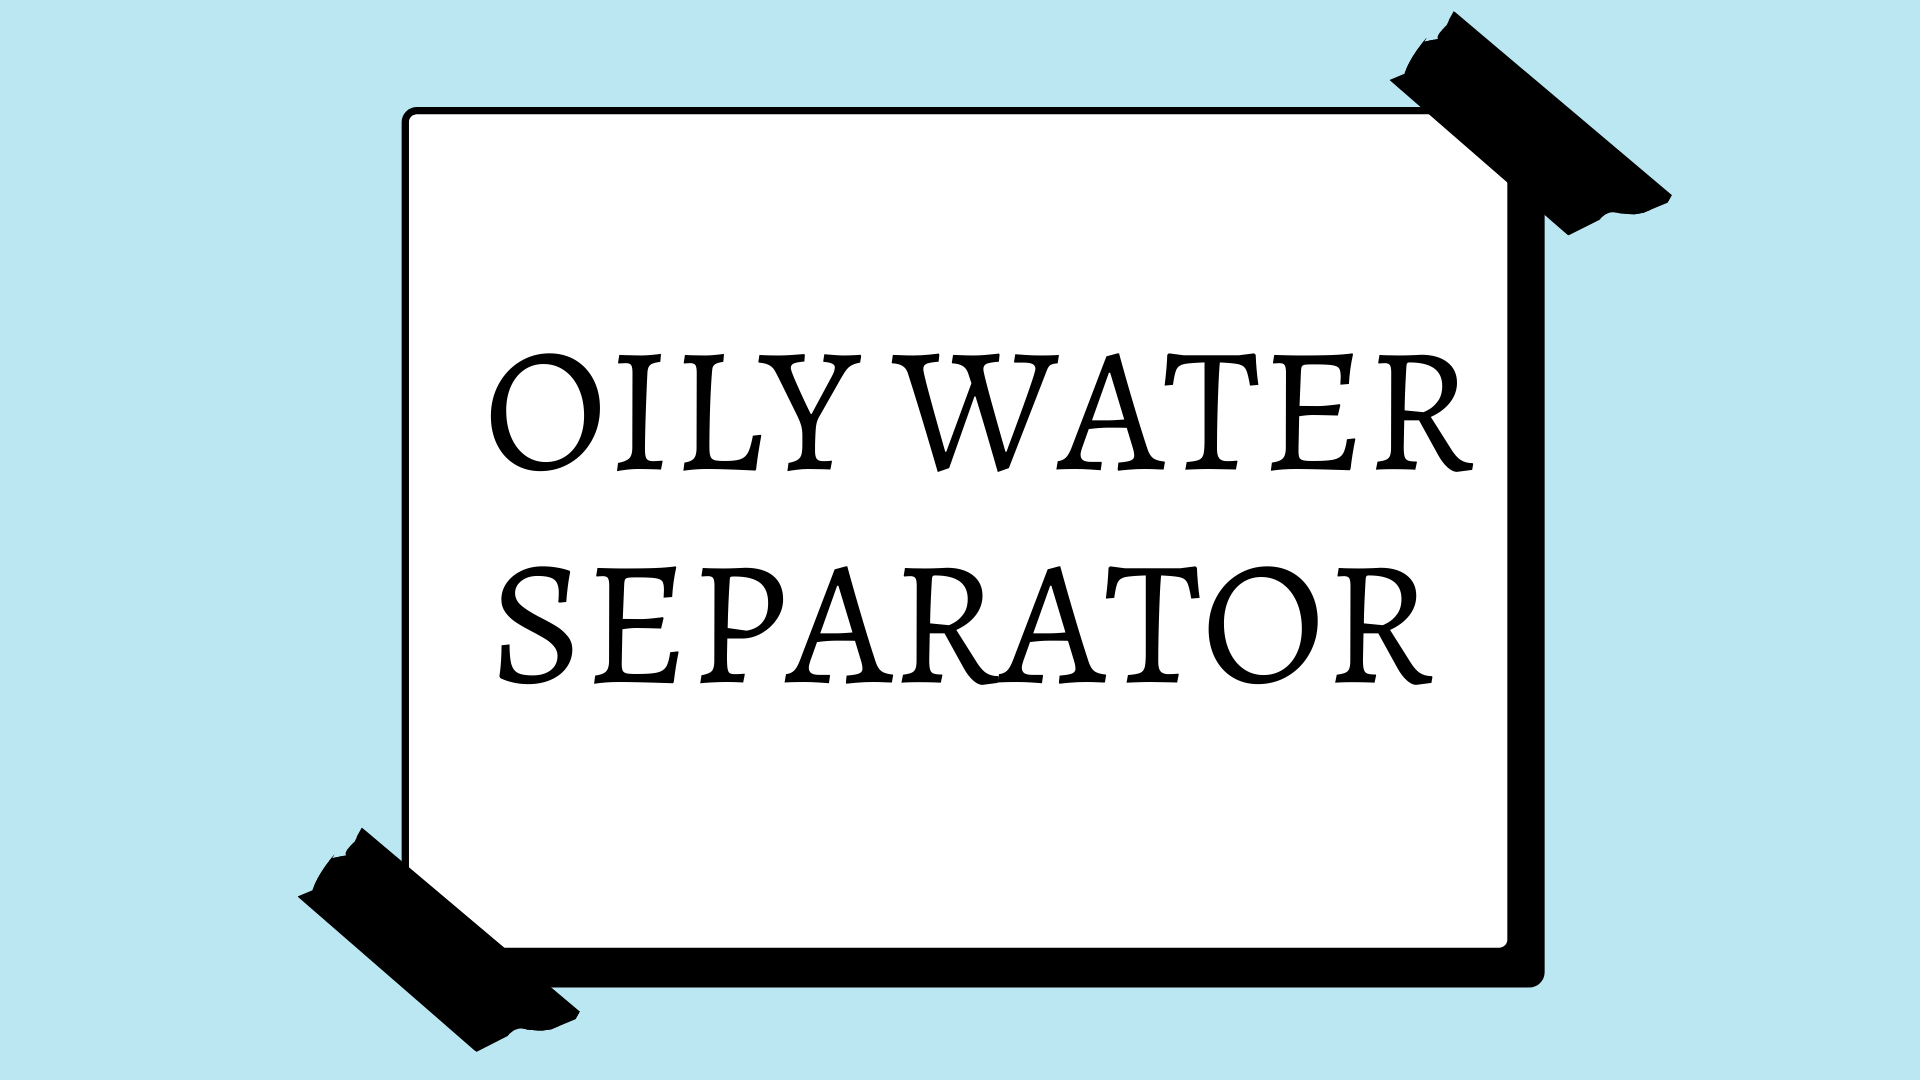 Oily water separator featured image